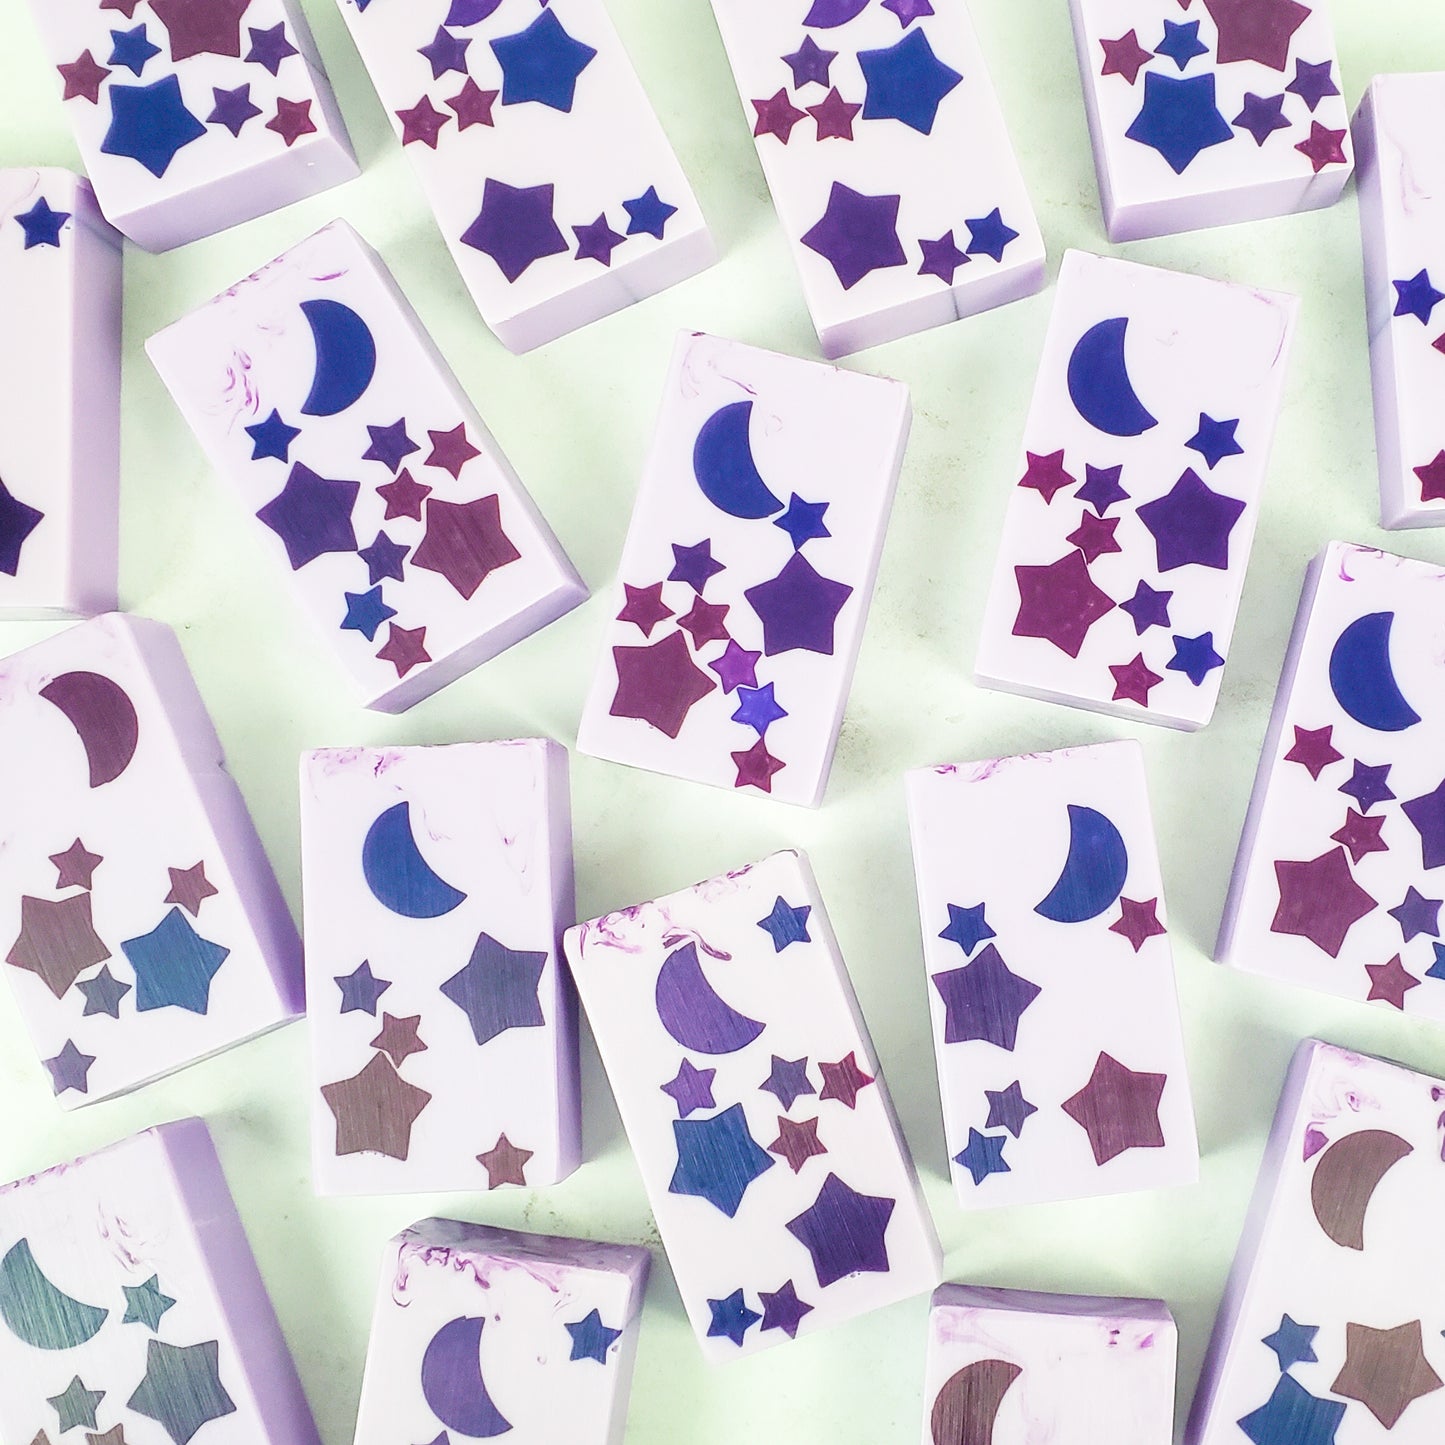 Several purple rectangle soaps with purple stars and moon in the centers